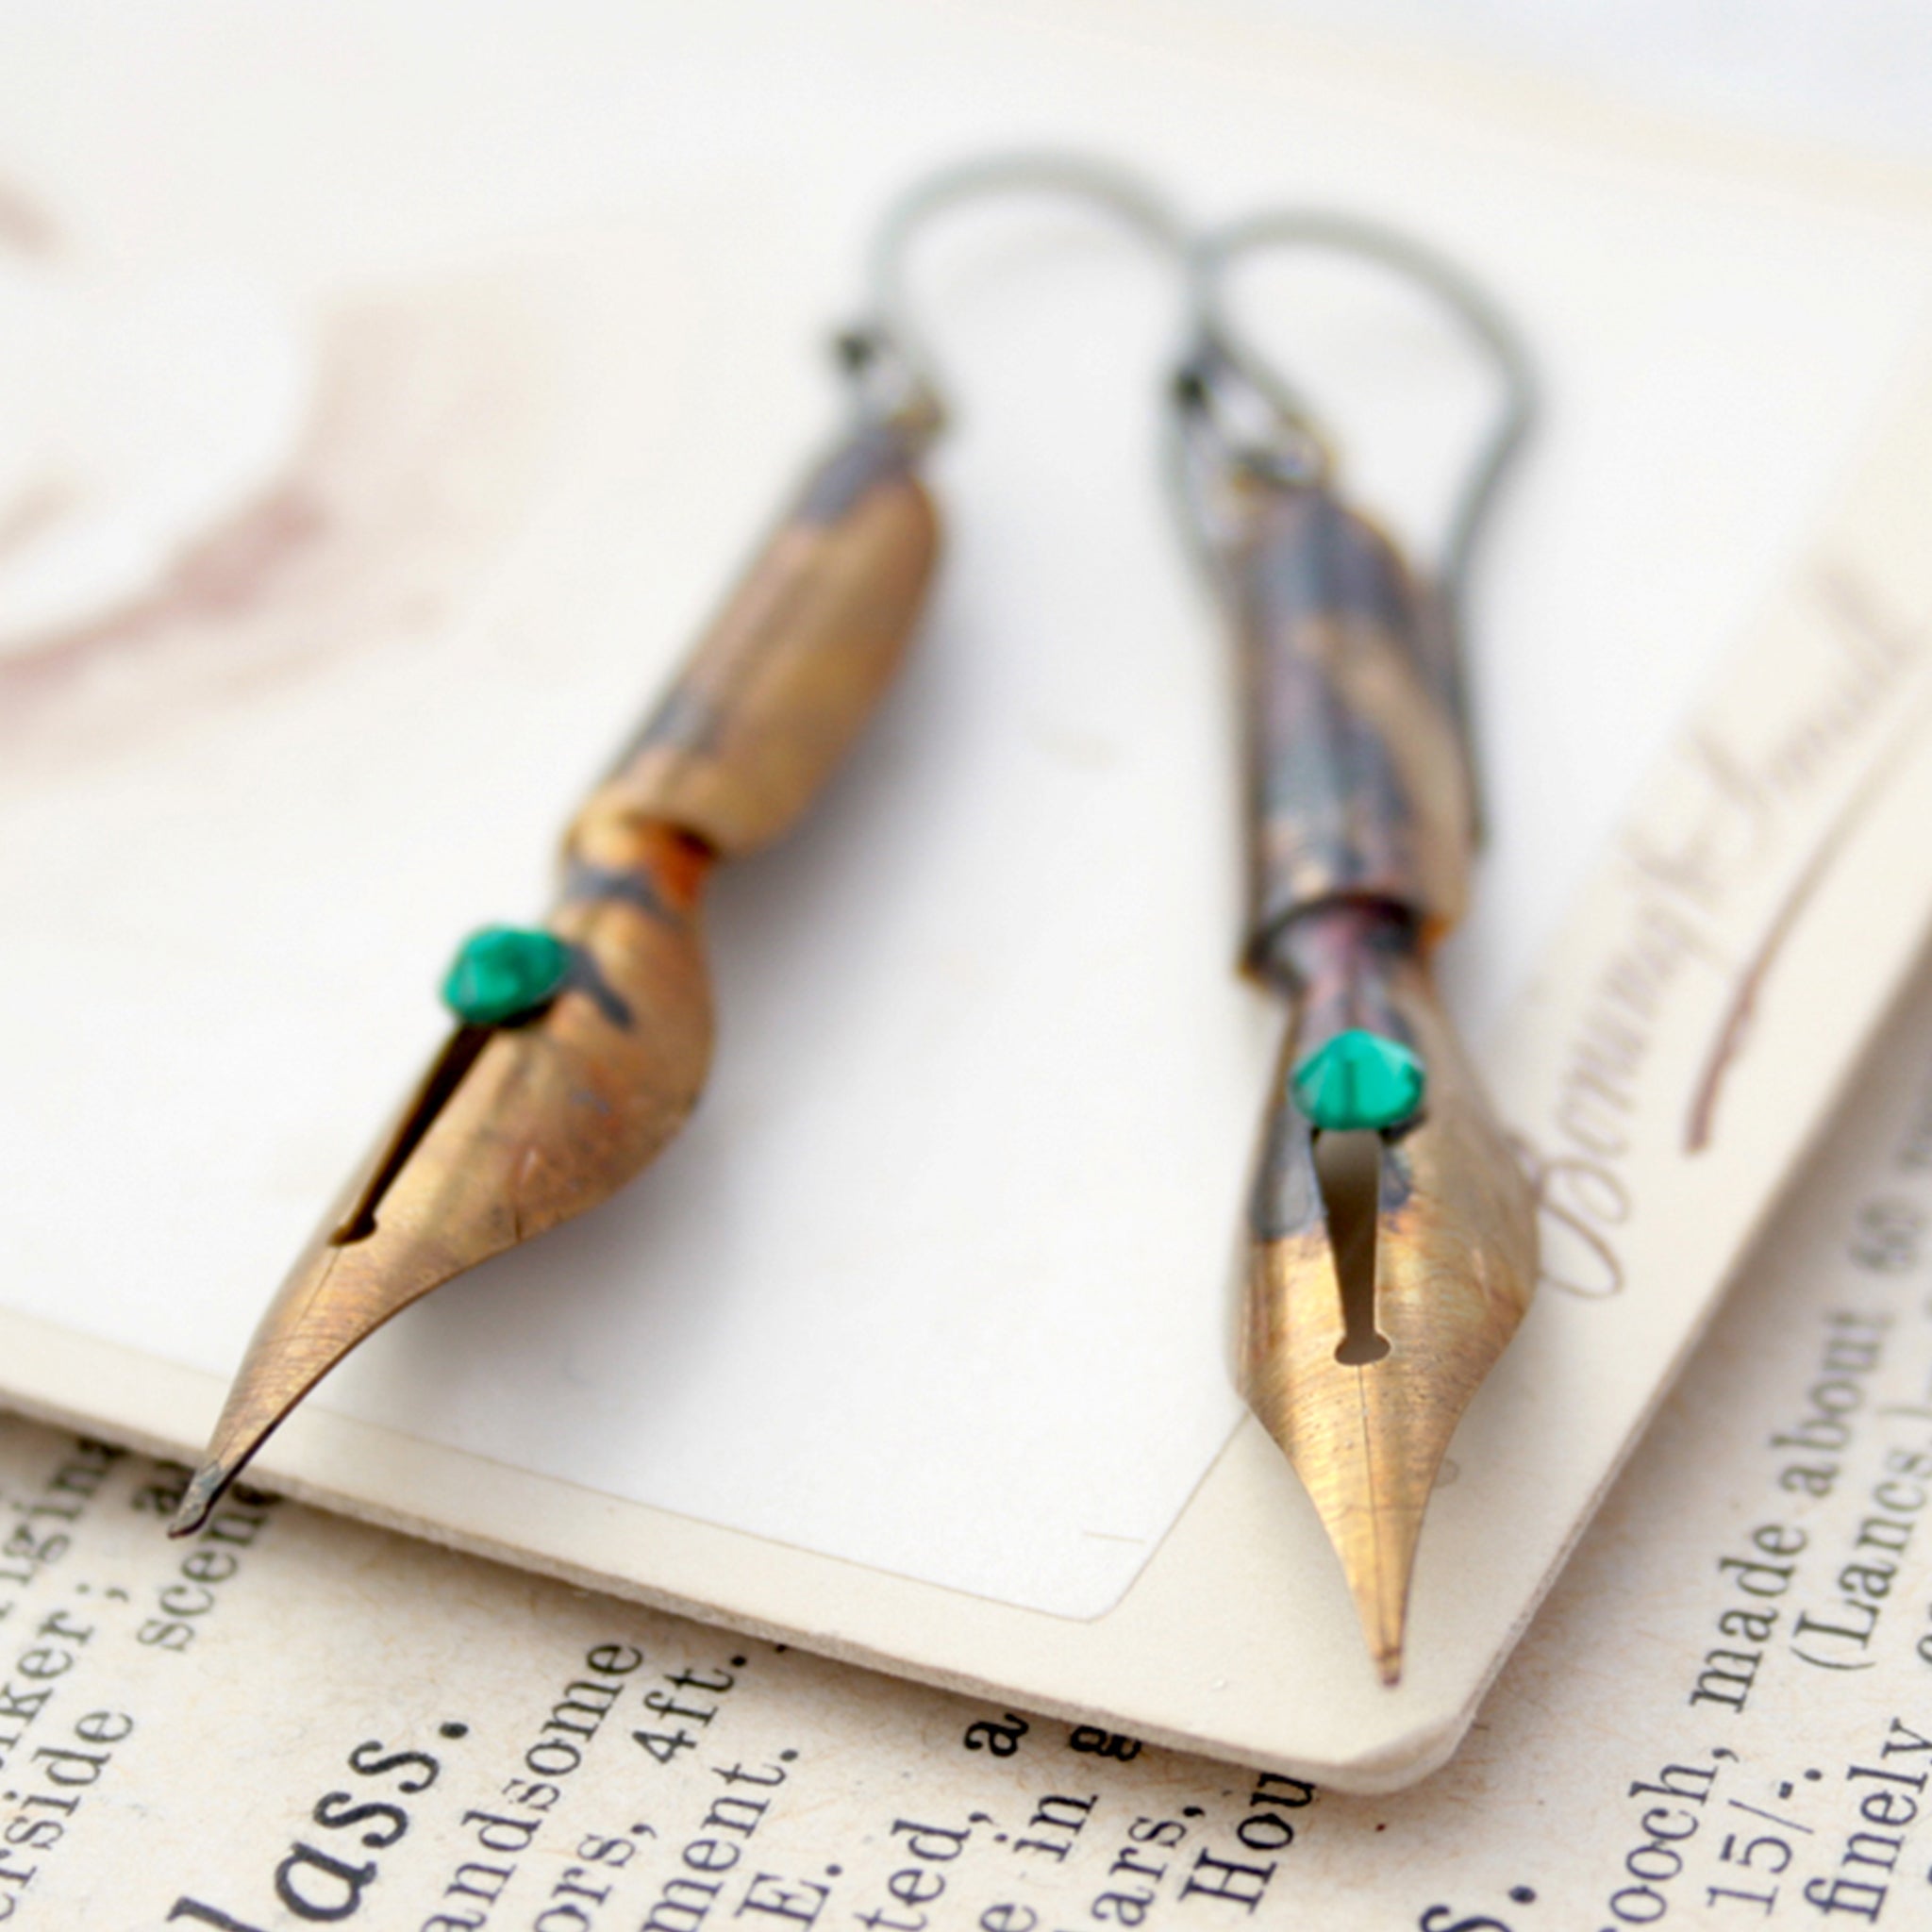 gold earrings made of real pen nibs with turquoise crystals lying on an old photograph